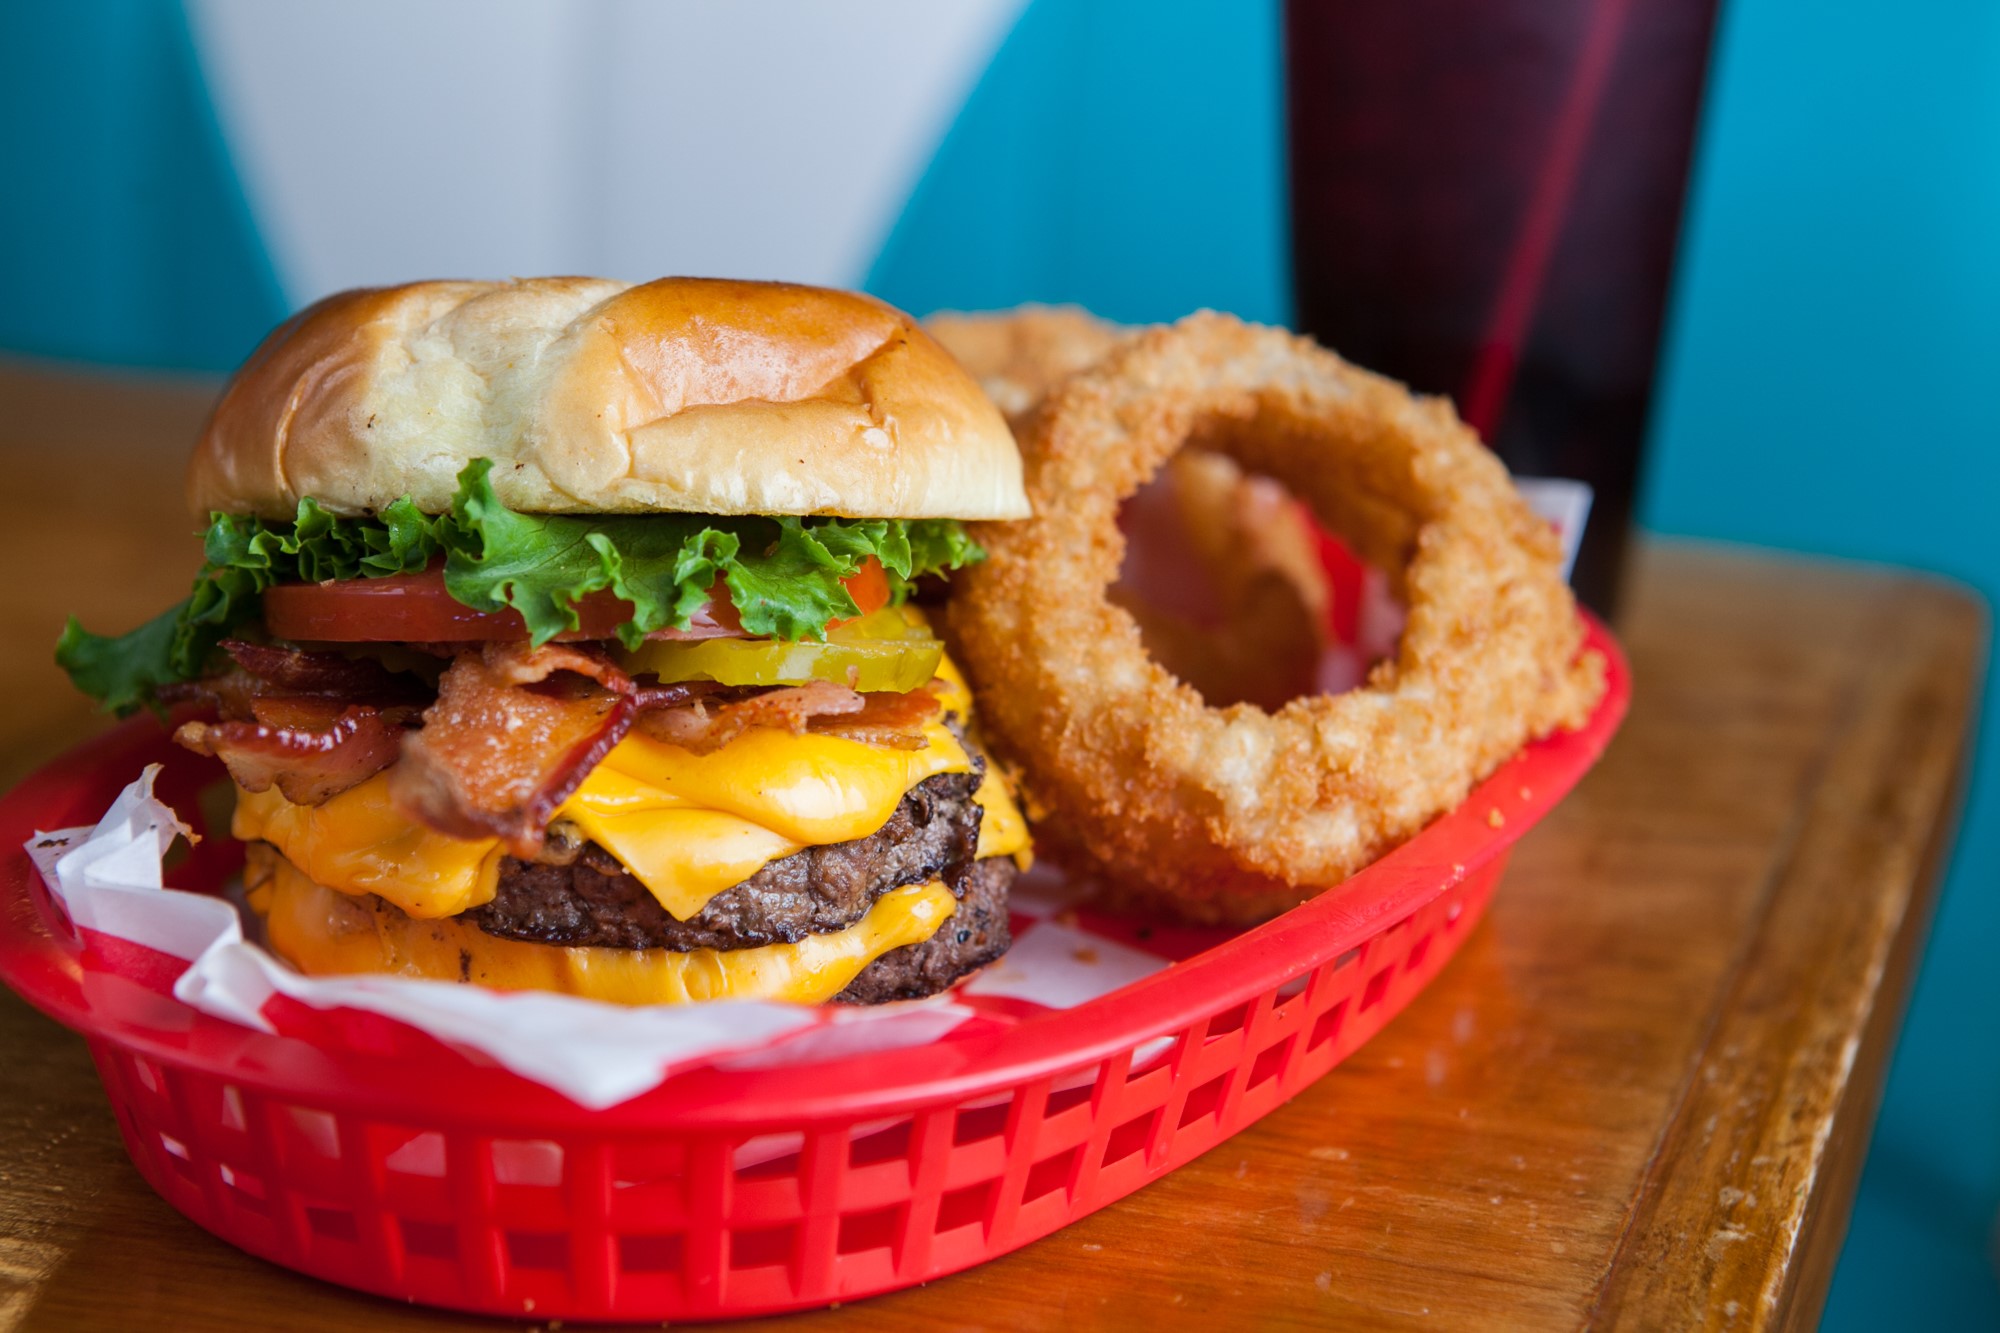 A cheeseburger with onion rings in a red basket